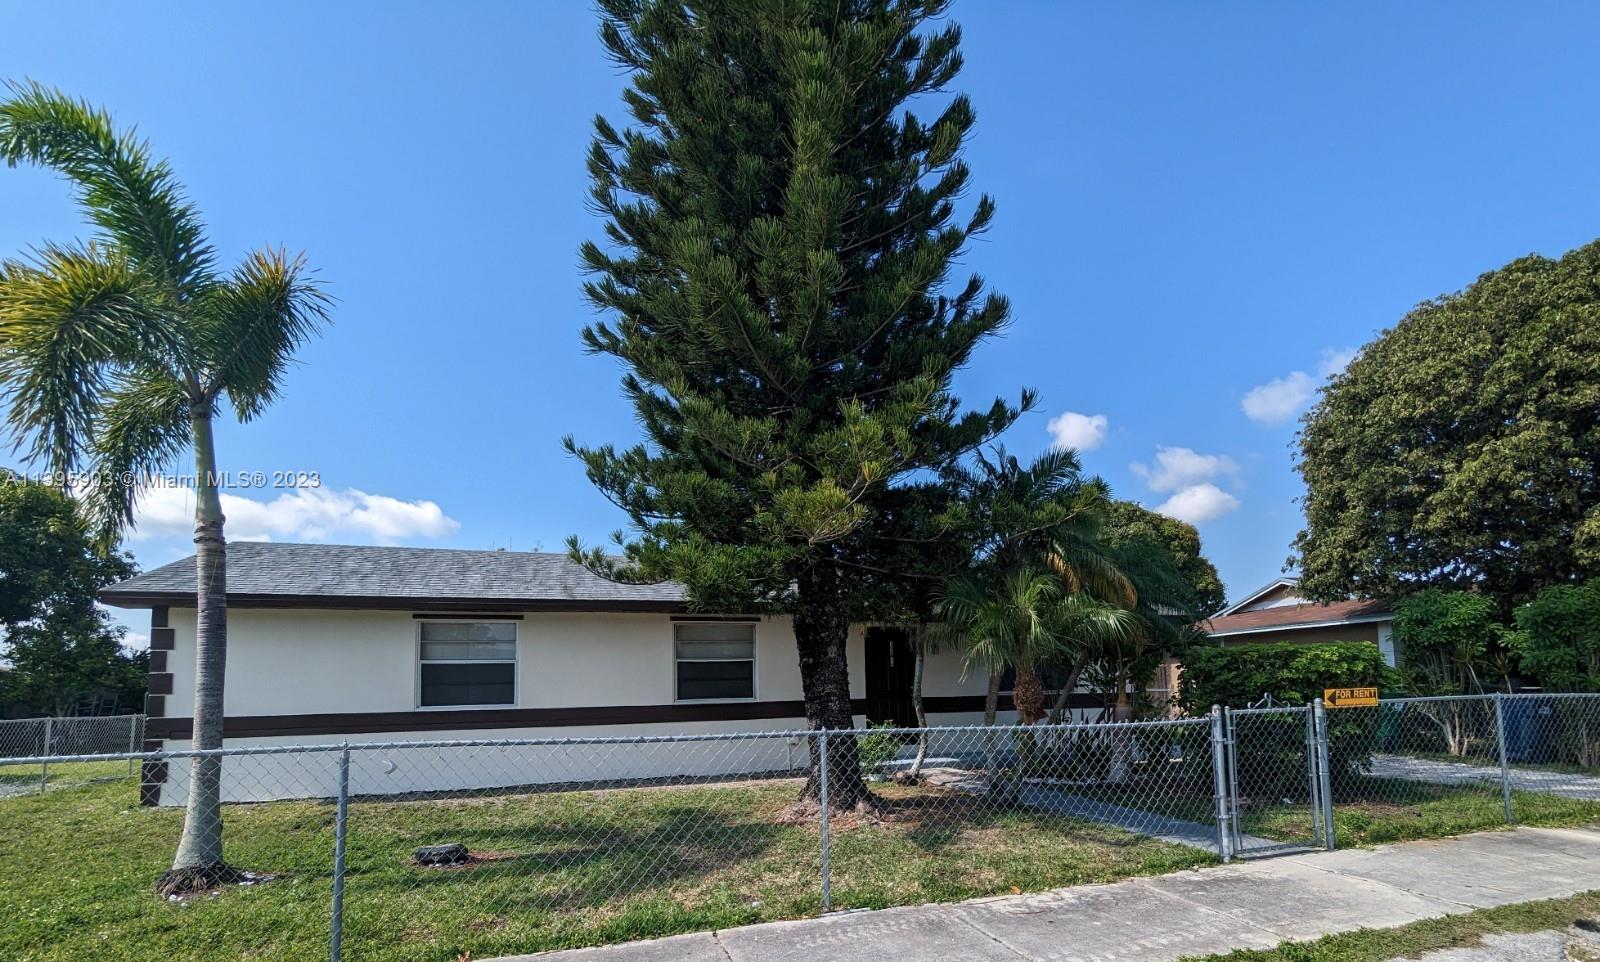 Single Family Home 3 bedrooms 2 baths,  tile all throughout, no association, oversize fenced in backyard.
This home will not last call now to schedule appointment